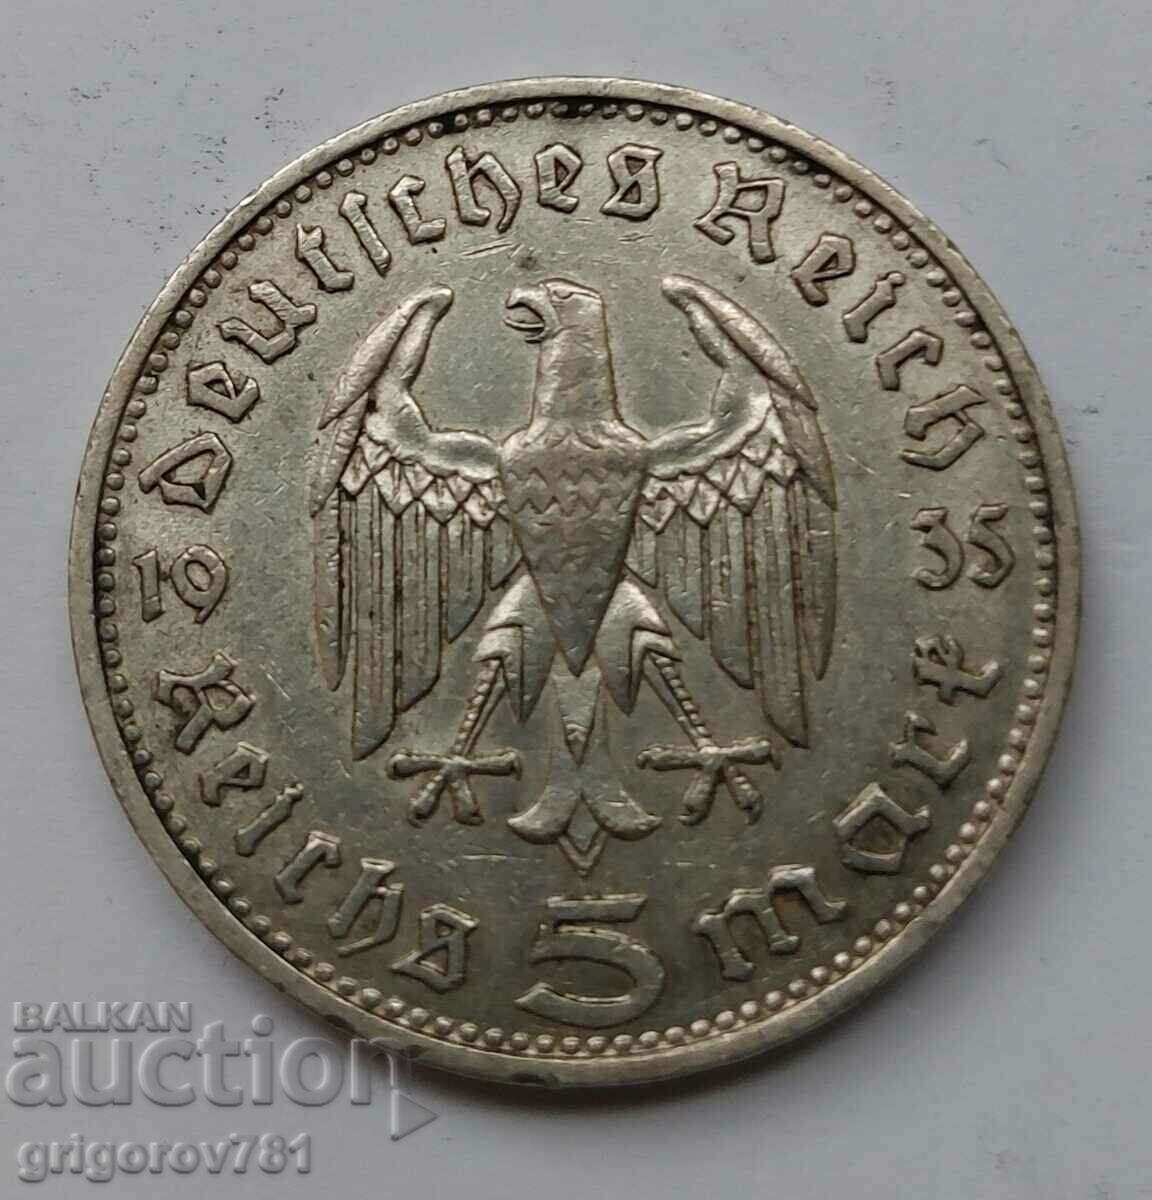 5 Mark Silver Germany 1935 D III Reich Silver Coin #84